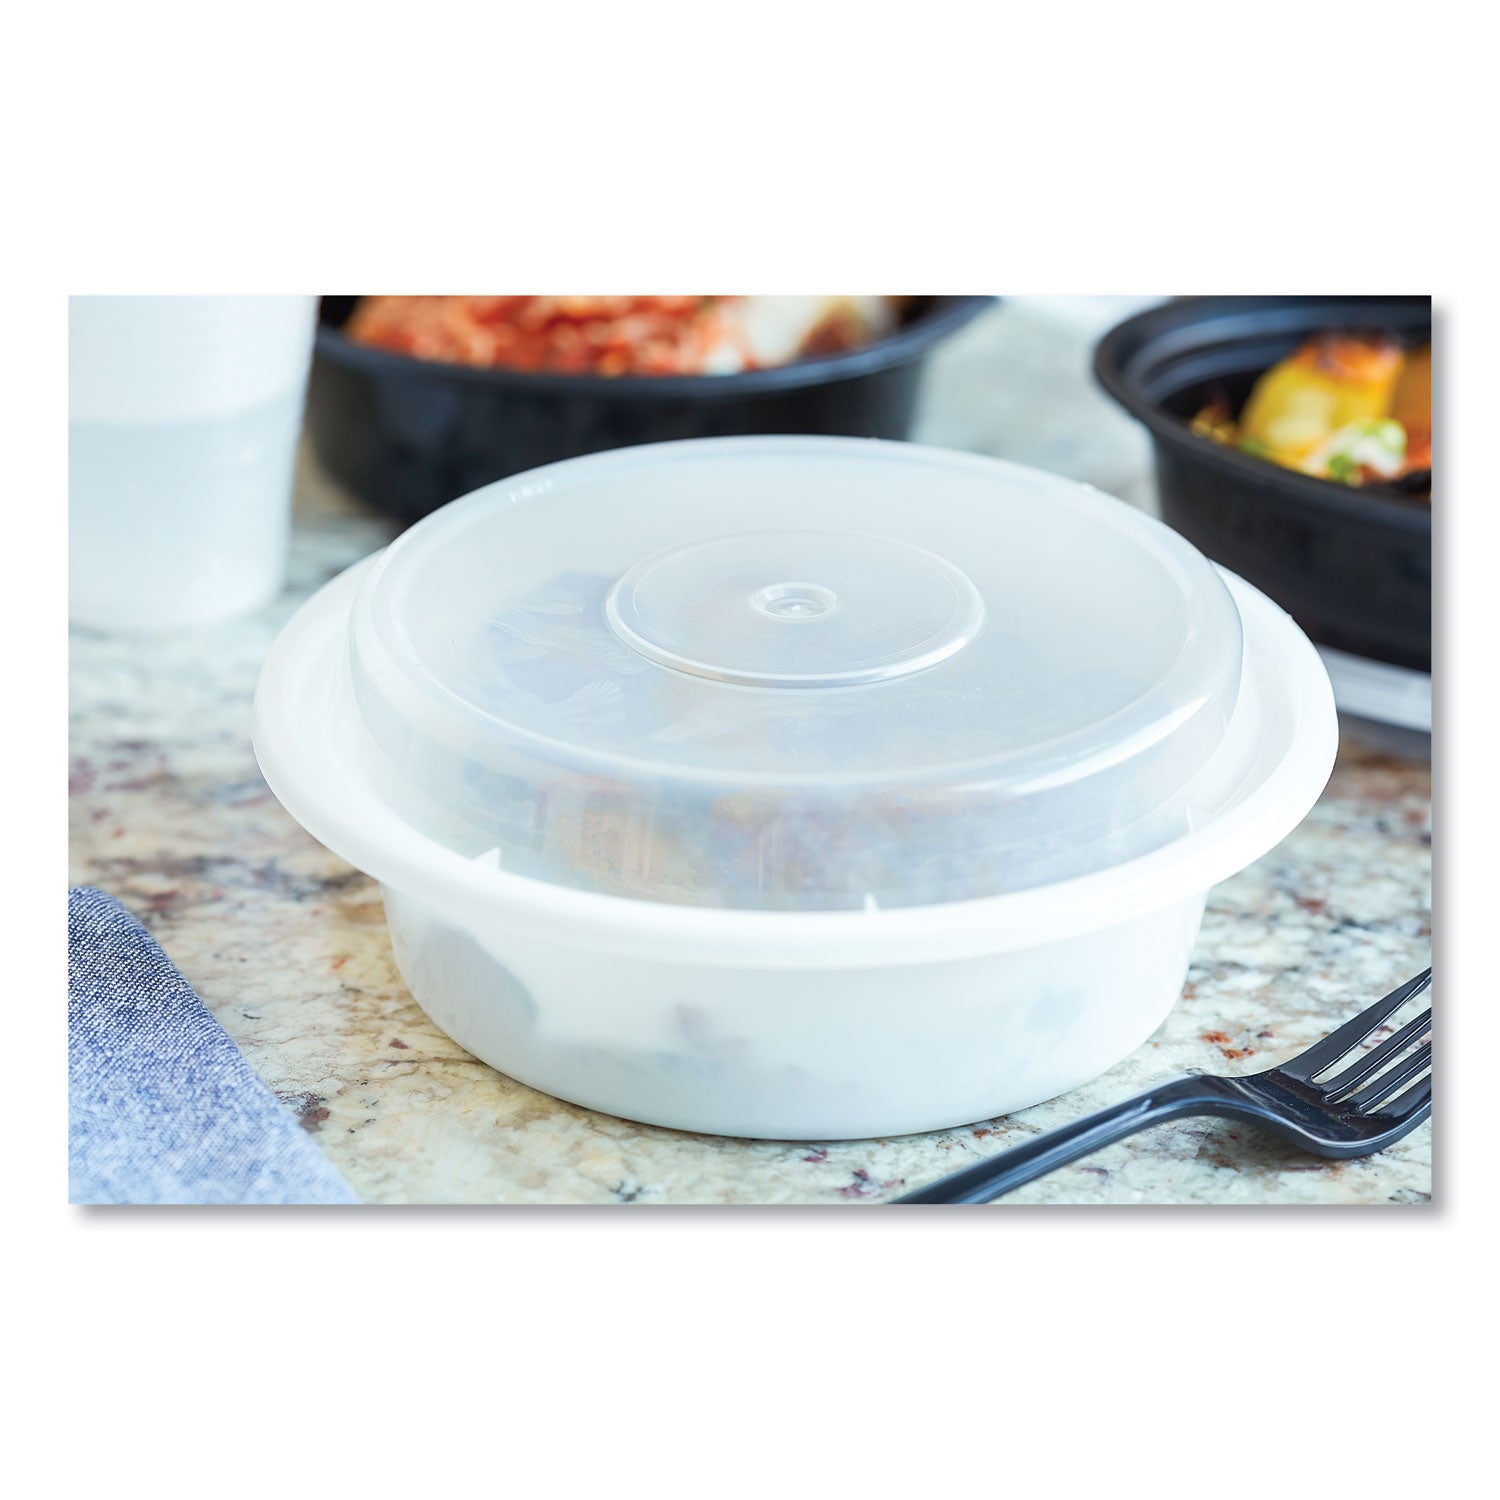 newspring-versatainer-microwavable-containers-round-16-oz-6-x-6-x-15-white-clear-plastic-150-carton_pctnc718 - 3